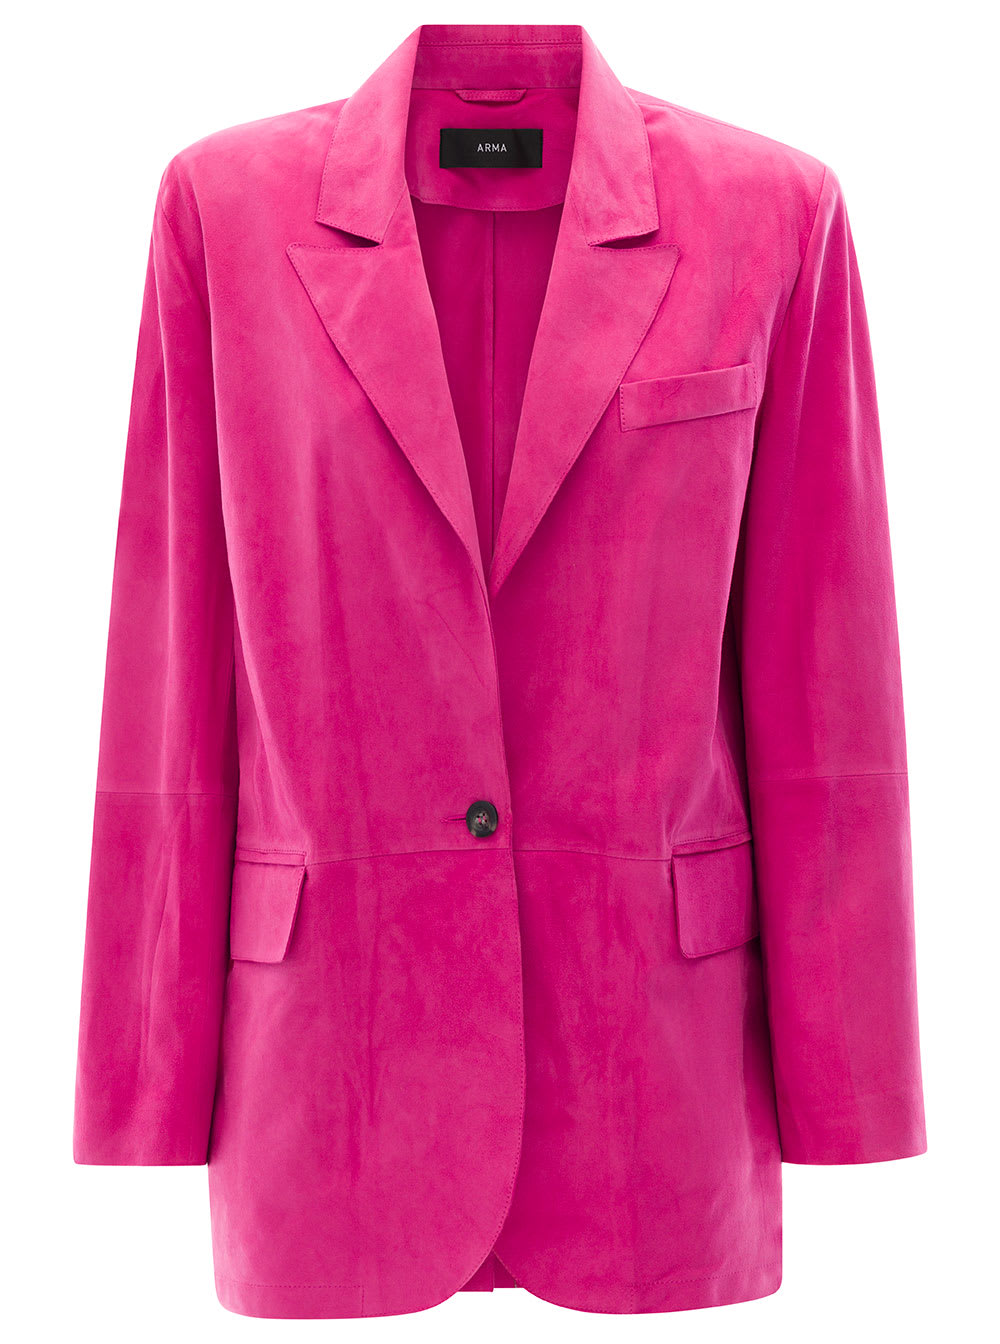 ARMA HOT PINK GOAT SUEDE BLAZER WITH FRONT POCKETS WOMAN